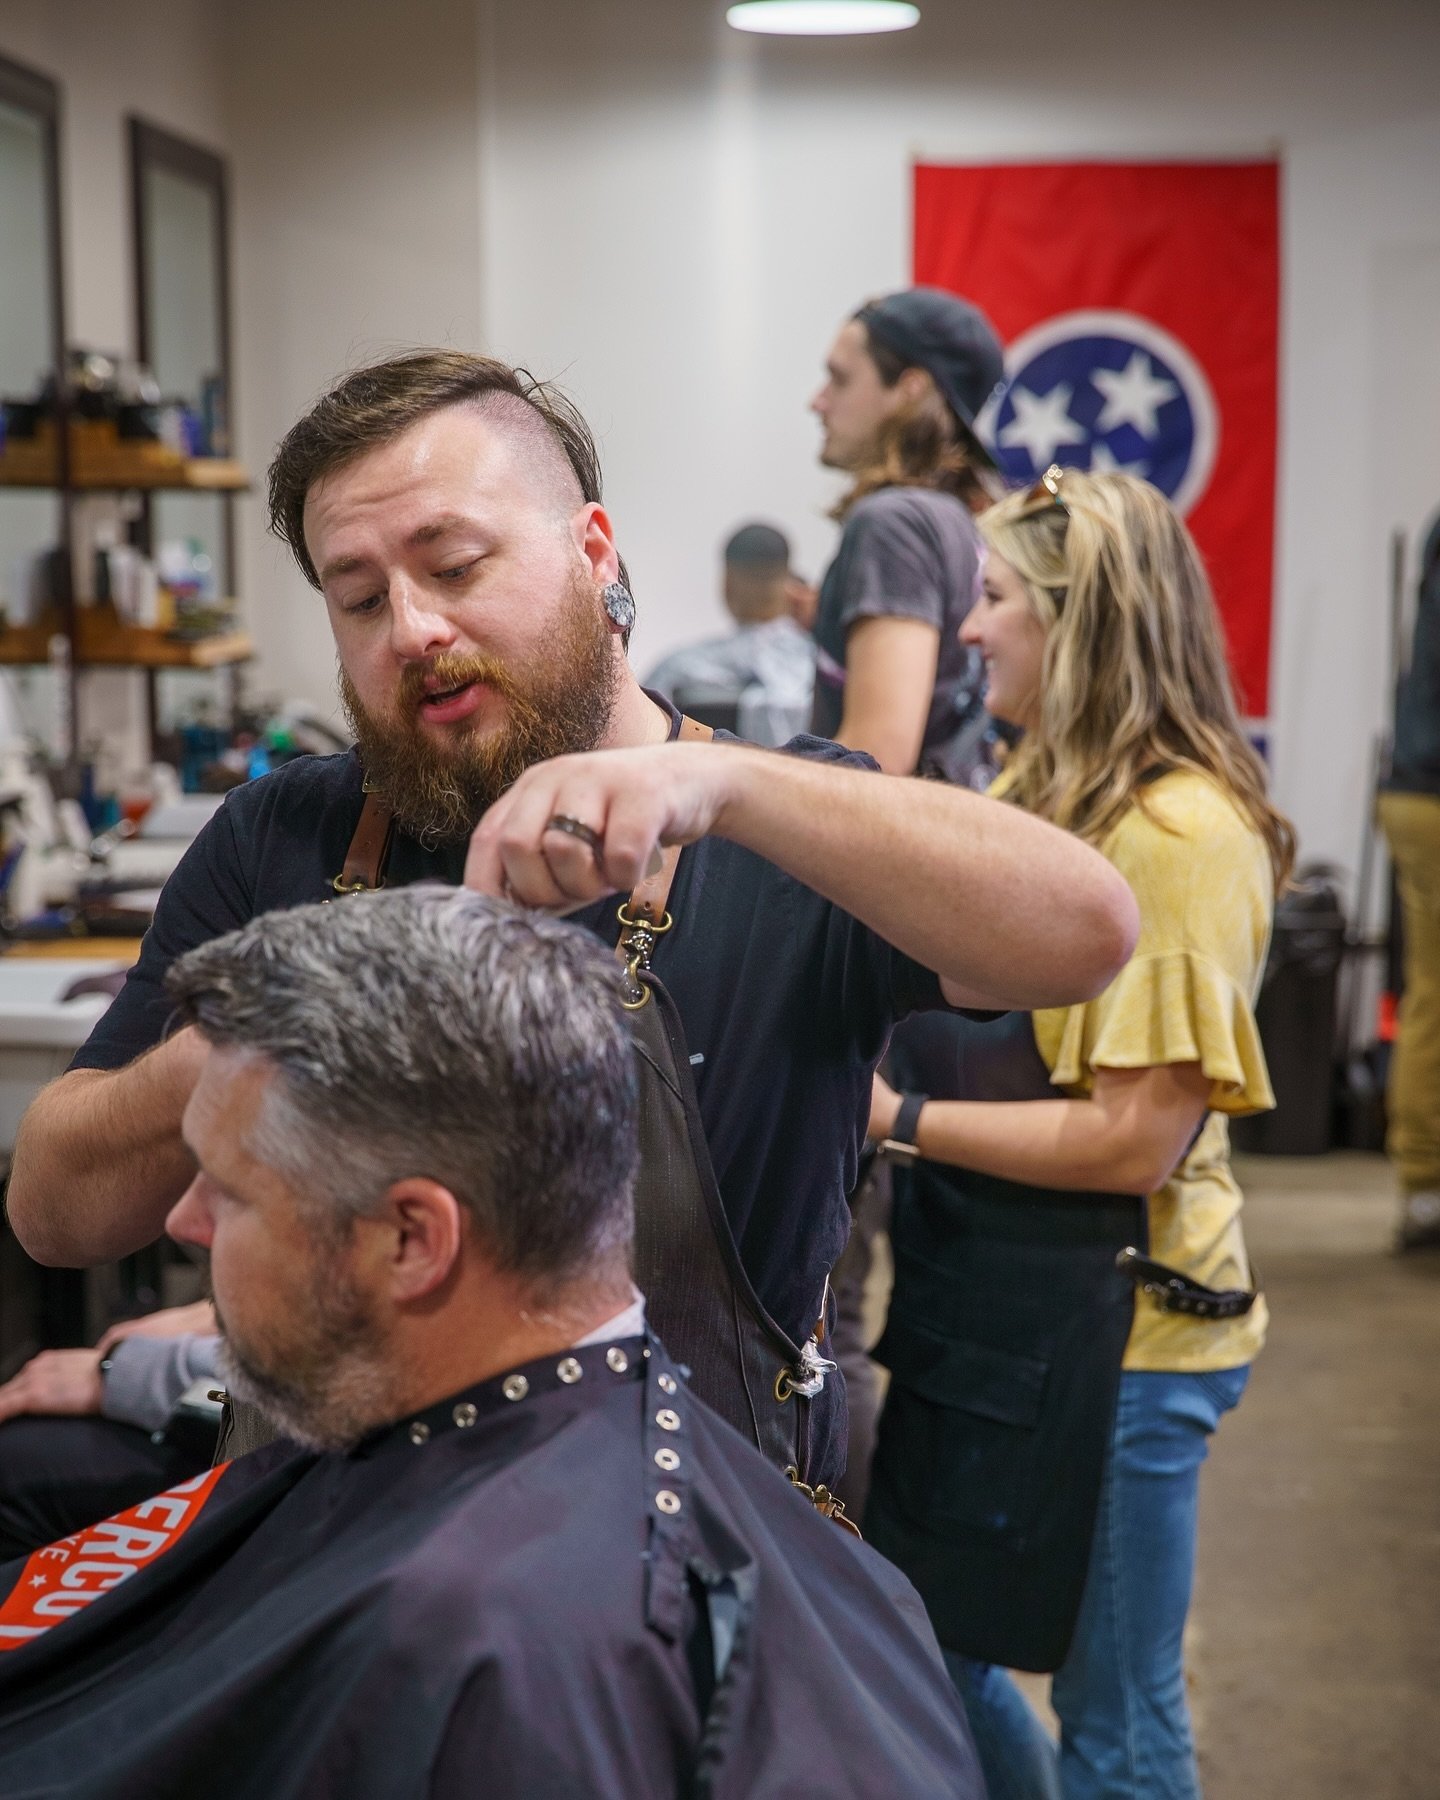 💈Full hearts and a full shop. Book your next cut online today! 👉LINK IN BIO👈

#franklintn #thefactoryatfranklin #theblockhouse #nashvillebarber